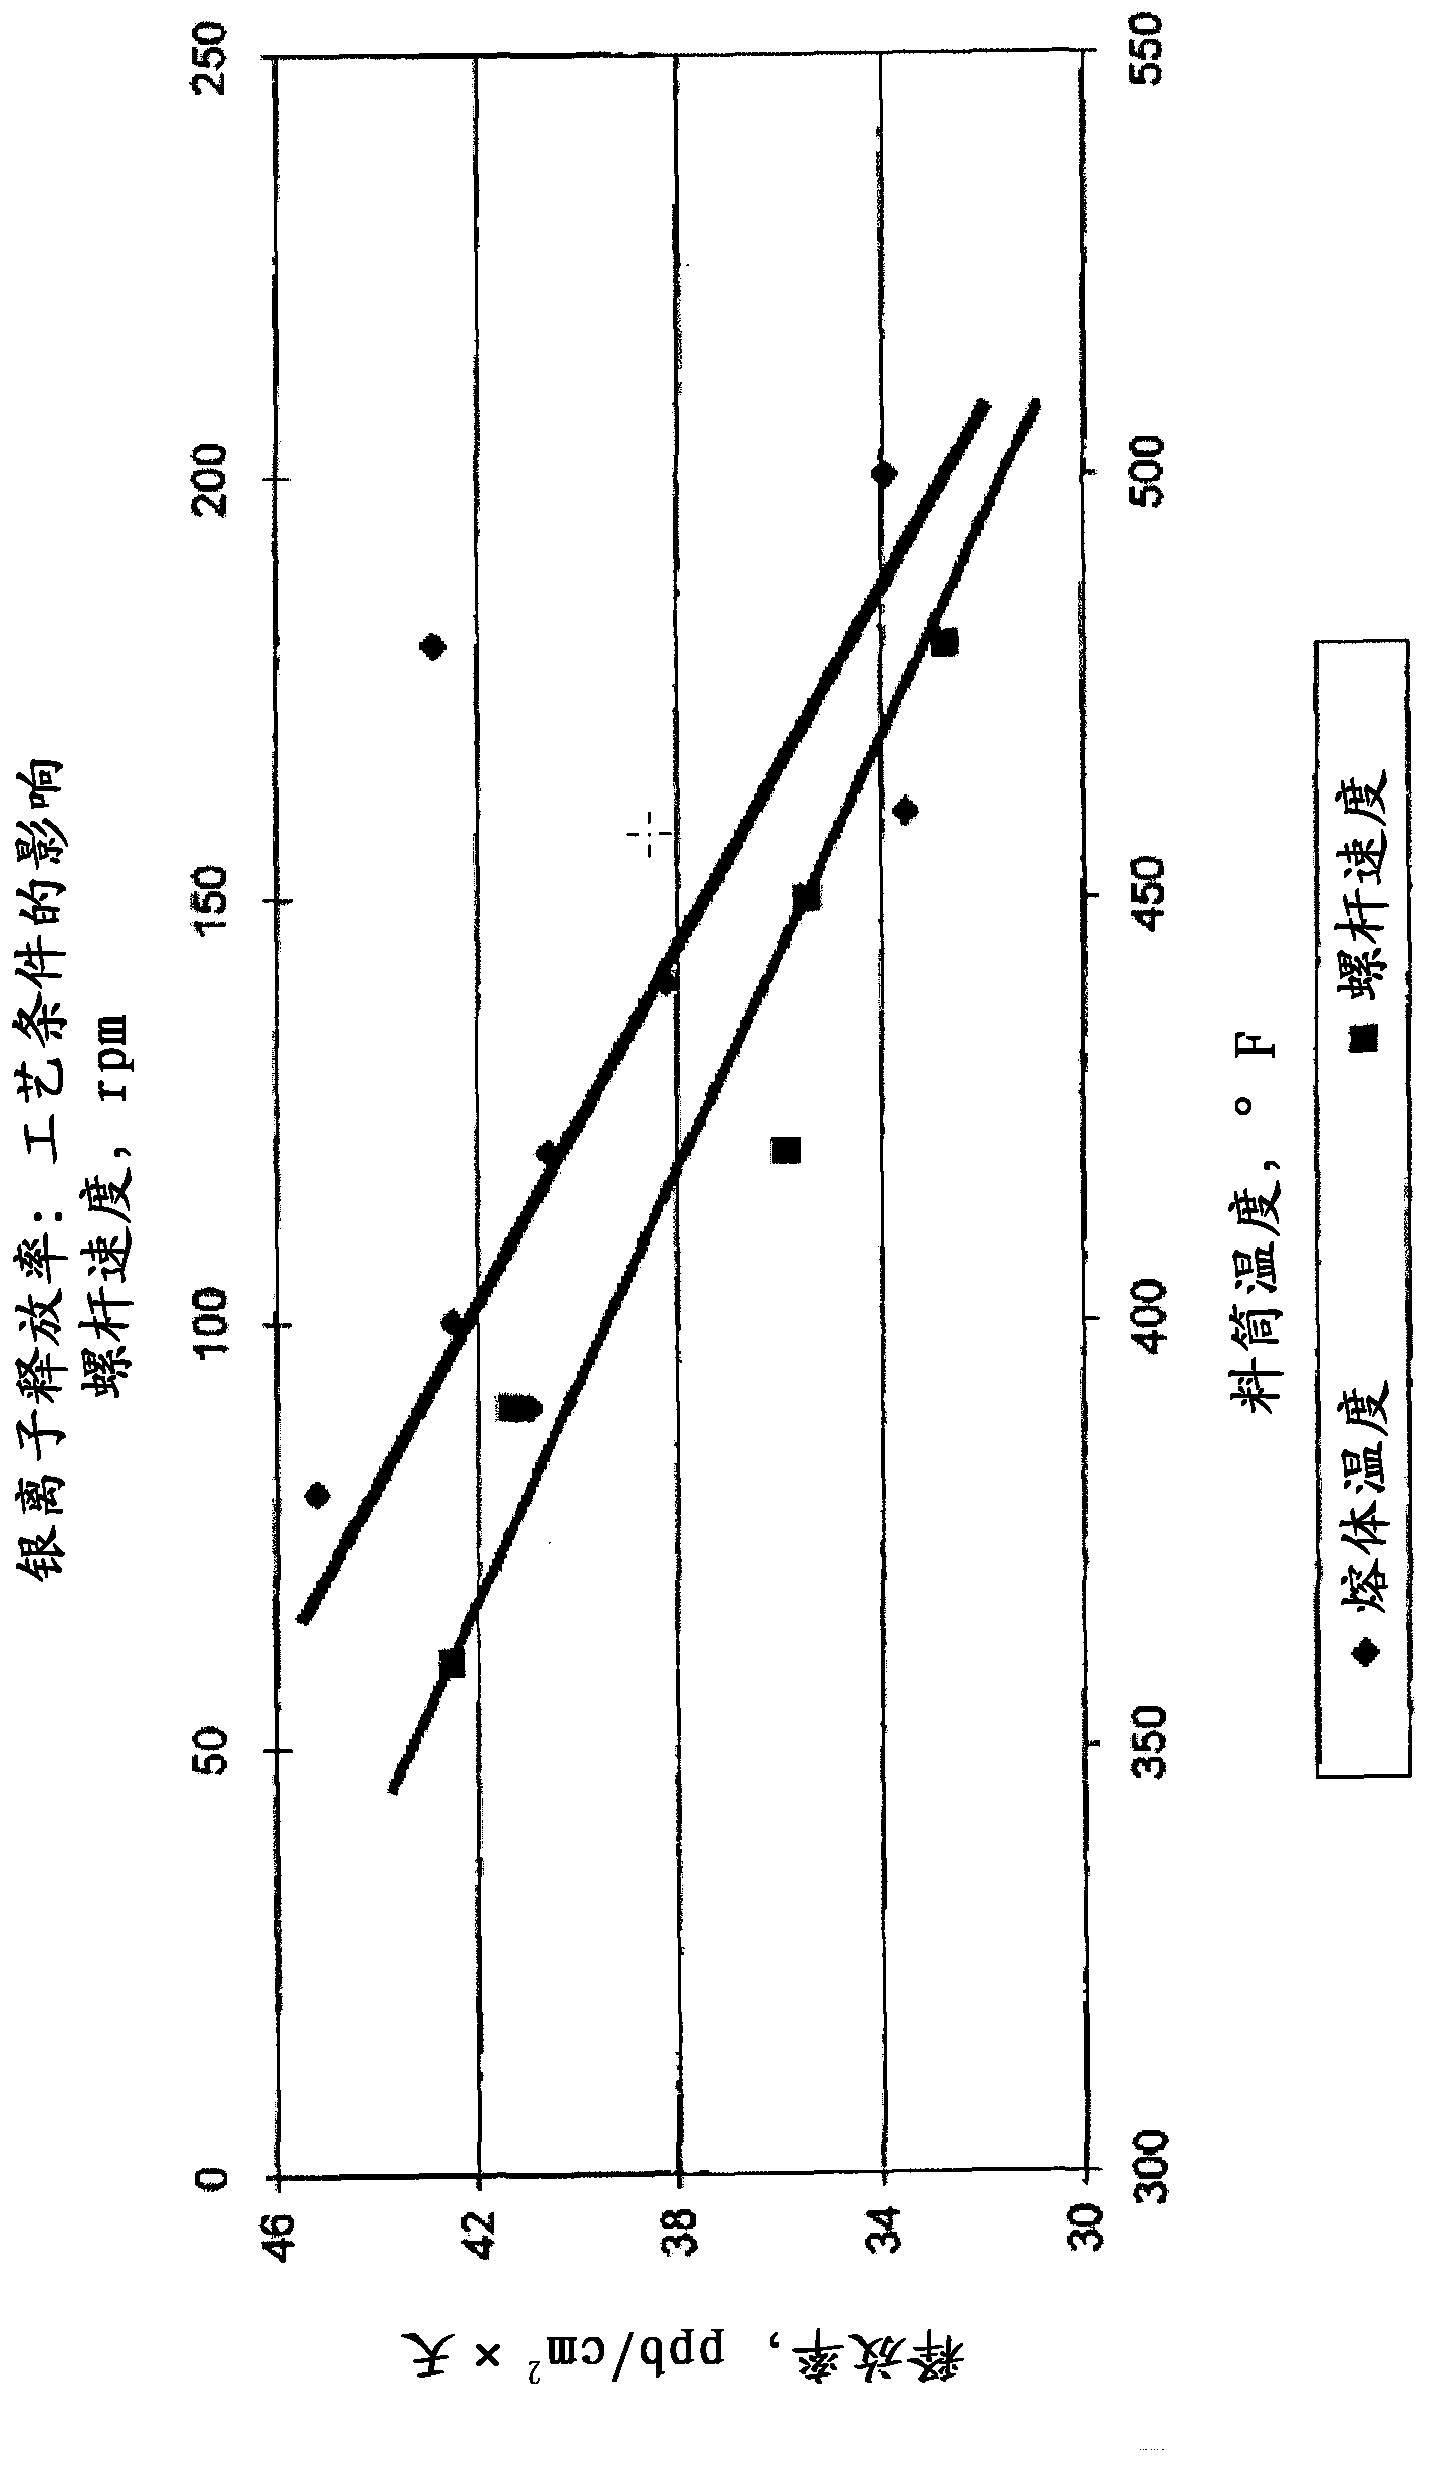 Method for manufacturing antimicrobial acrylic materials